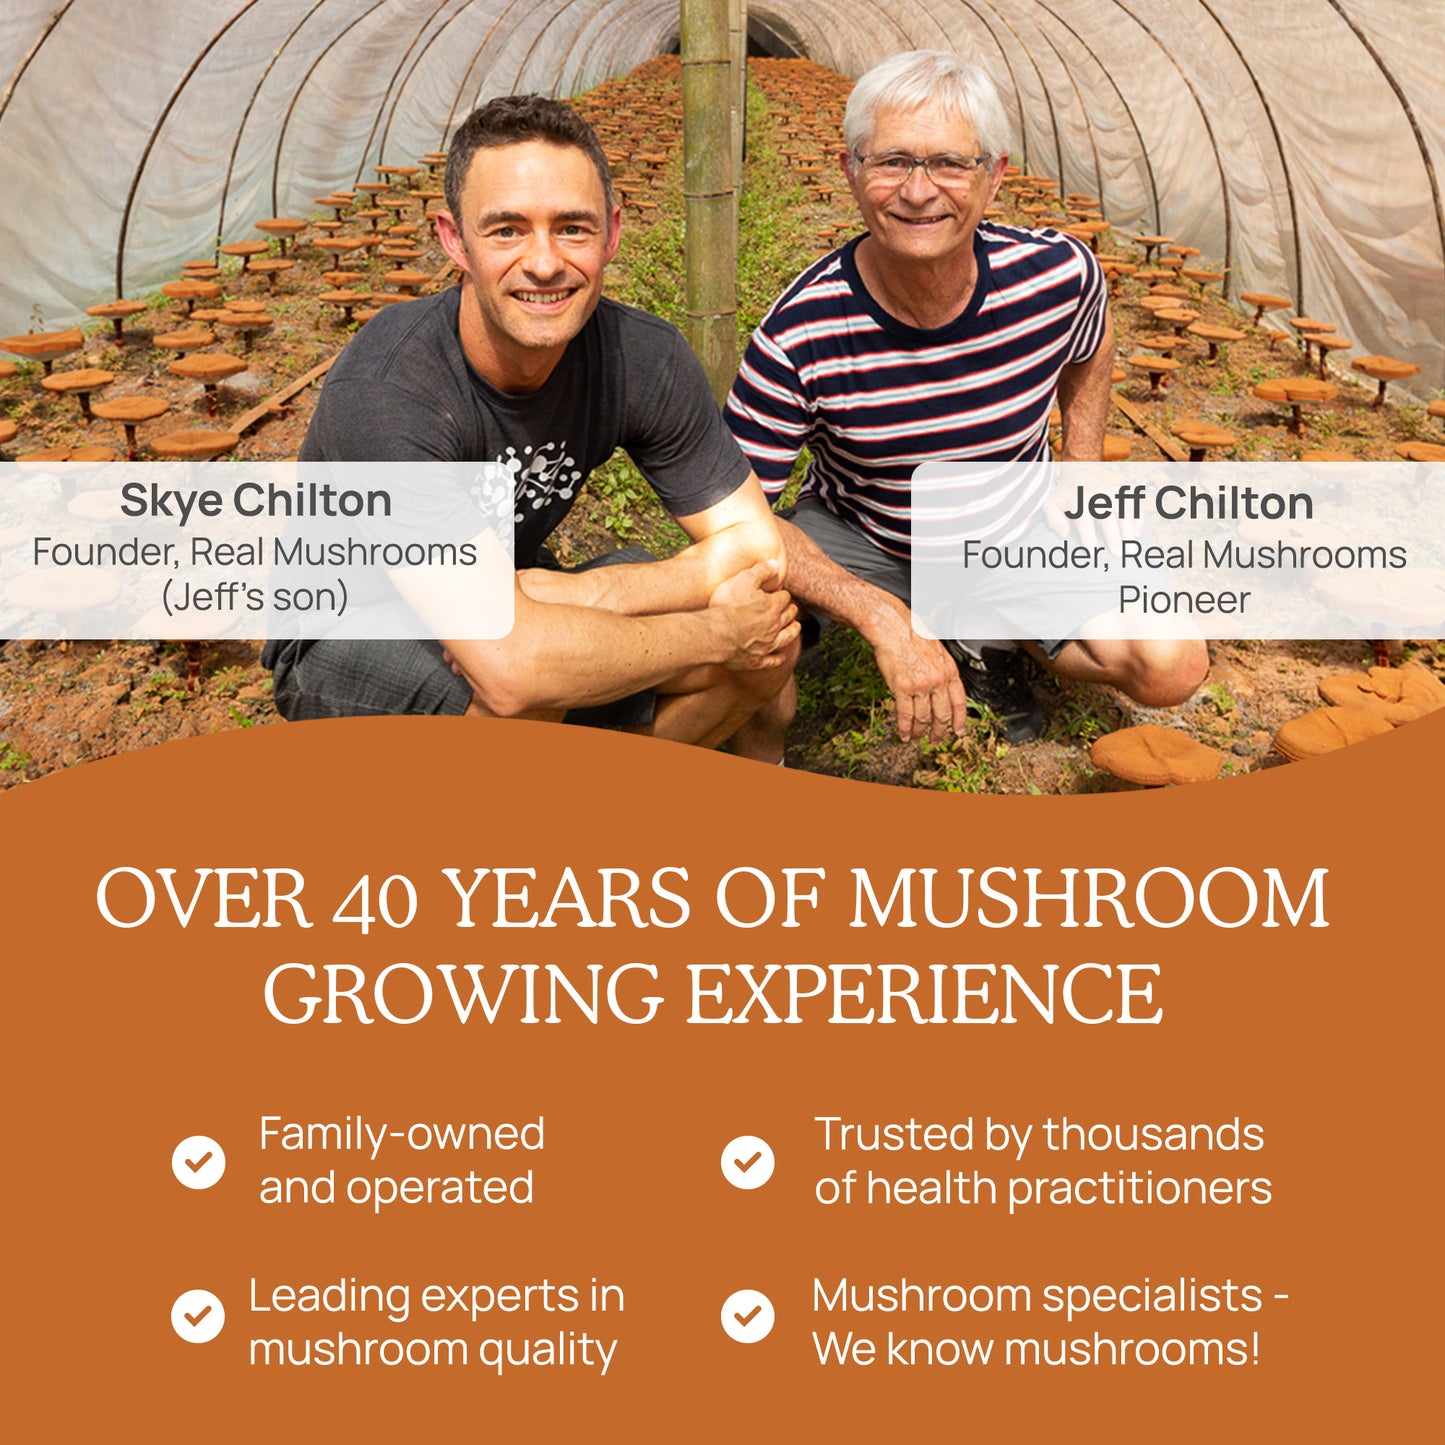 Two men, identified as Skye Chilton and Jeff Chilton, founders of Real Mushrooms, posing inside an organic mushroom growing facility, celebrating over 40 years of experience in mushroom cultivation and expressing joy over their Organic Cordyceps Mushroom Extract Powder – Bulk Supplement.